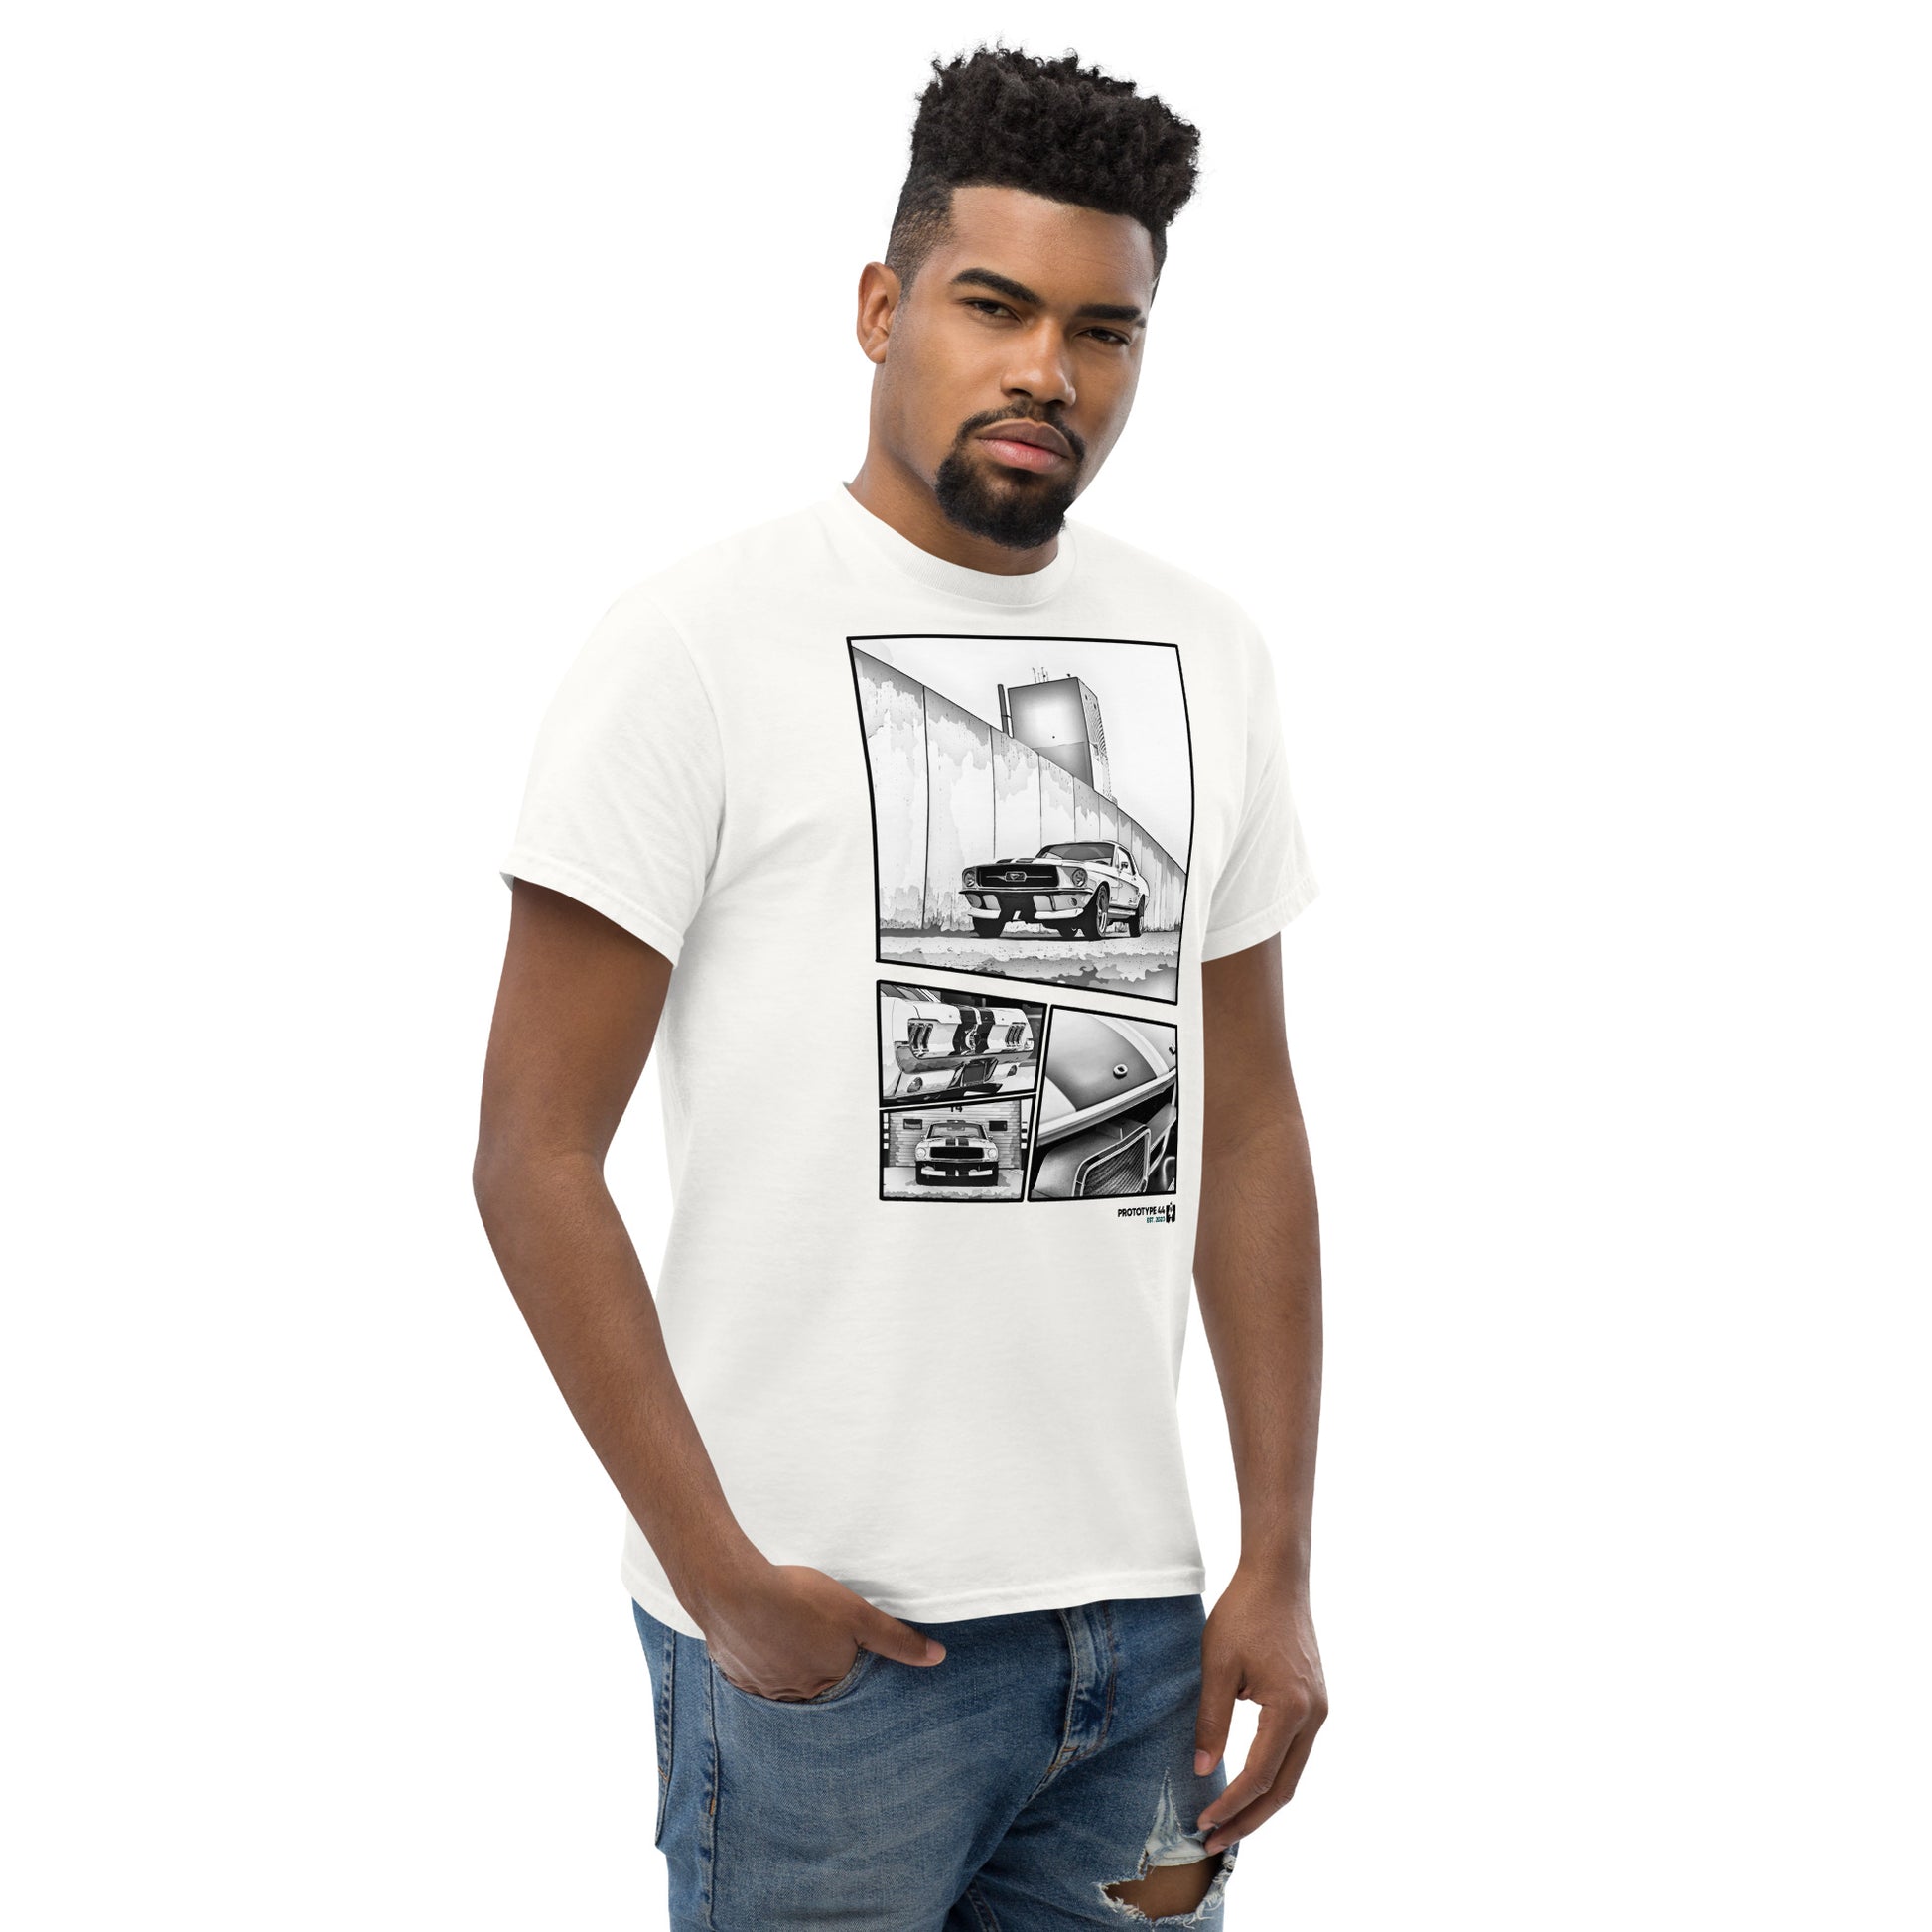 Man looking somewhat serious wearing classic Ford Mustang white cotton shirt